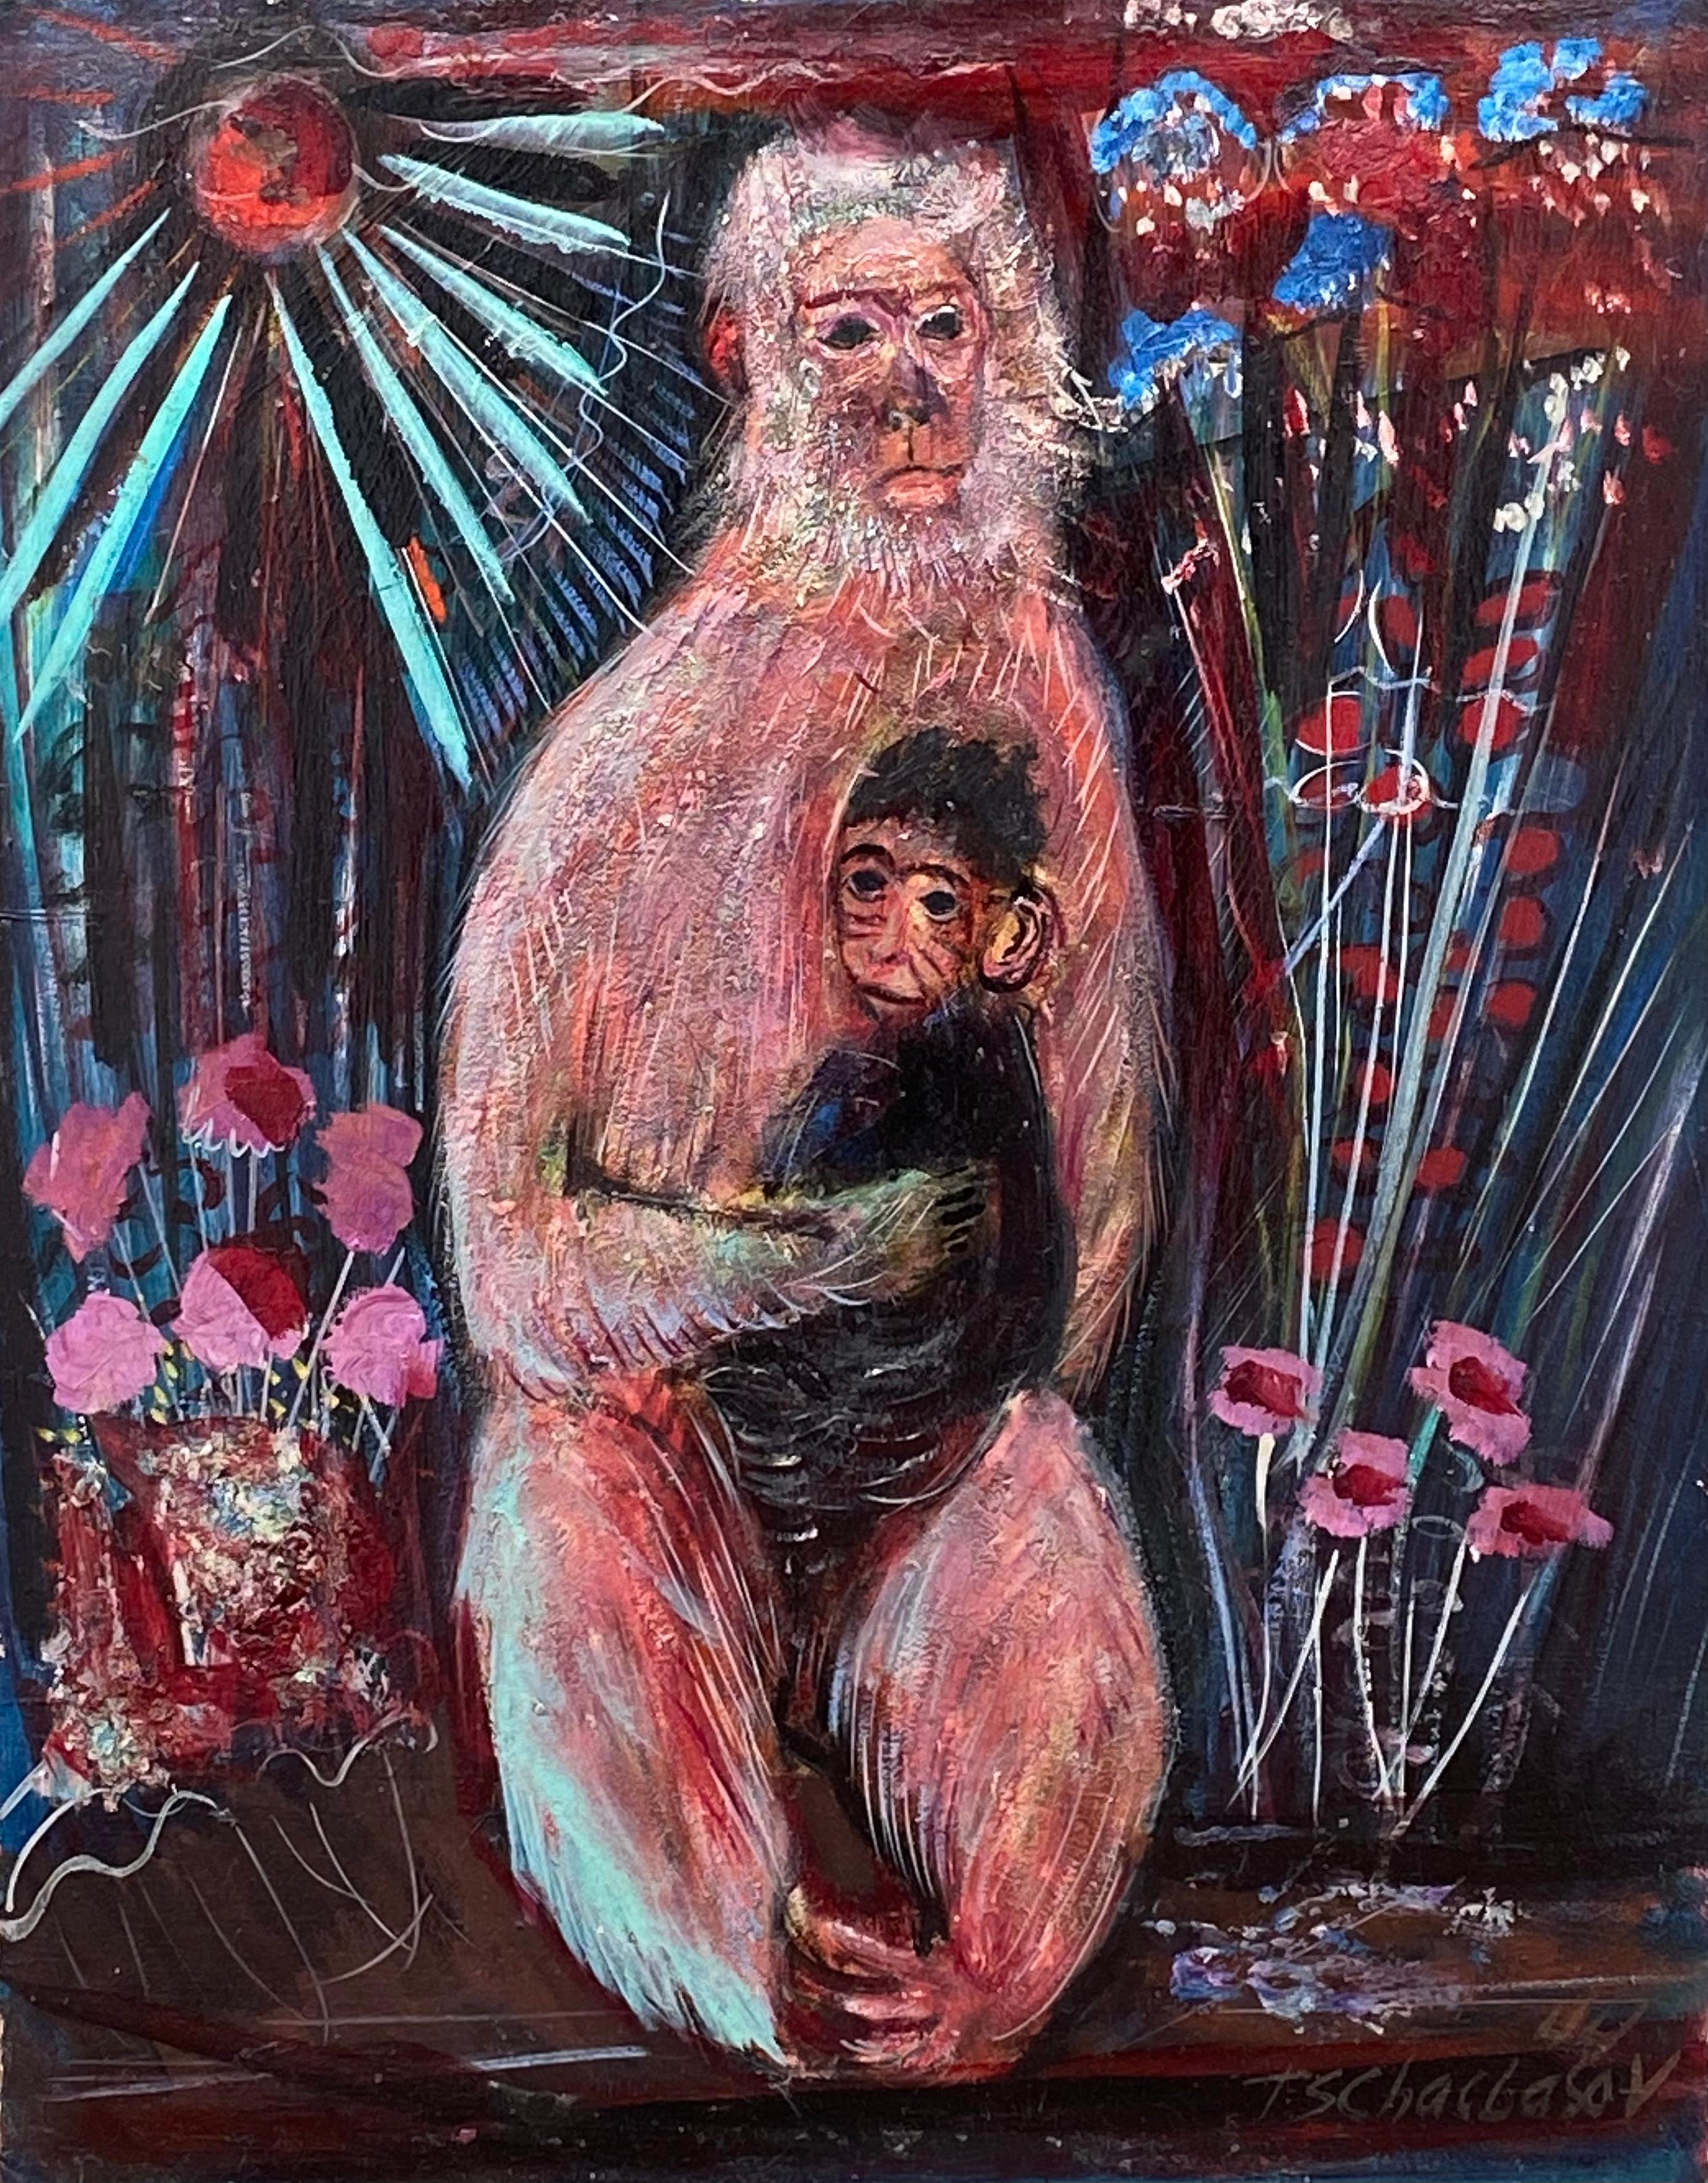 “Apes” - Painting by Nahum Tschacbasov